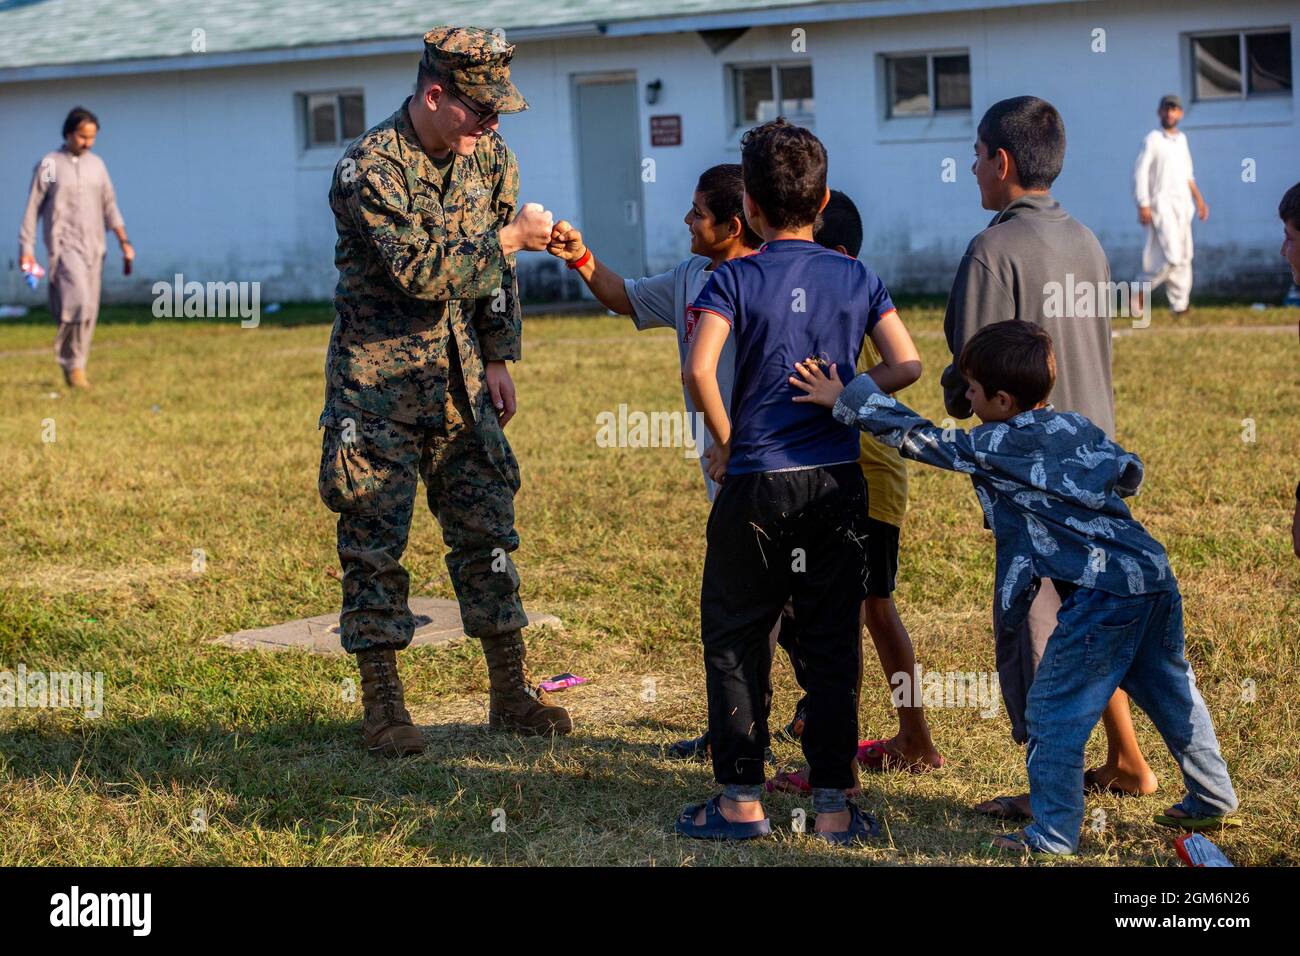 U.S. Navy Petty Officer 3rd Class Theodore Marcus, a Religious Program Specialist with the 26th Marine Expeditionary Unit (MEU), interacts with Afghan children during Operation Allies Welcome in Fort Pickett, Virginia, Sept. 15, 2021. The MEU command element and other supporting units from 3rd Battalion, 6th Marine Regiment, 2d Marine Division are providing support to Operation Allies Welcome. The Department of Defense, through U.S. Northern Command, and in support of the Department of Homeland Security, is providing transportation, temporary housing, medical screening, and general support for Stock Photo